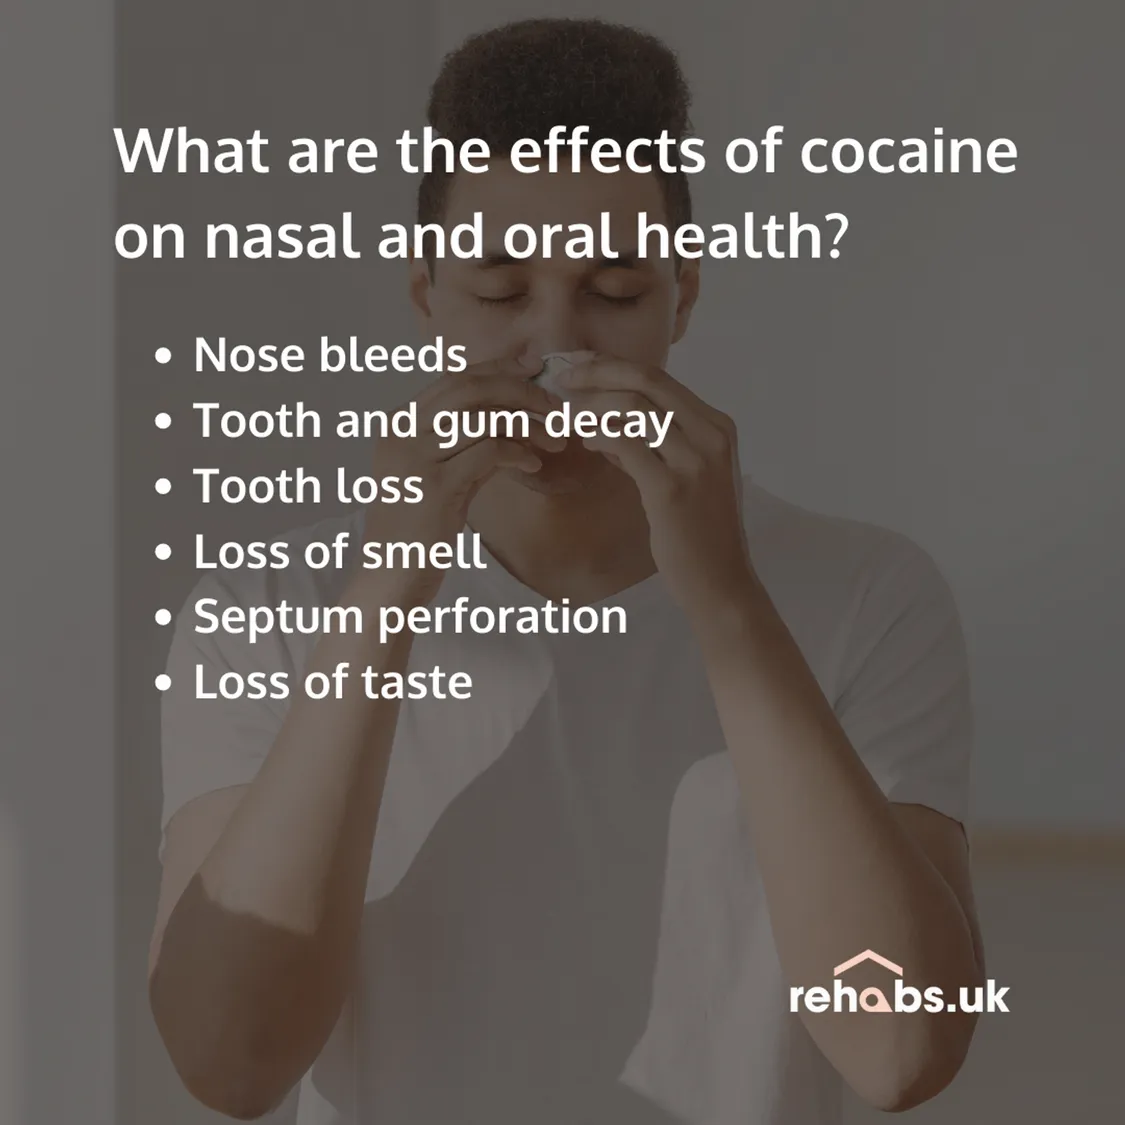 Infographic explaining what the effects of cocaine on nasal and oral health is - Nose bleeds Tooth and gum decay Tooth loss Loss of smell Septum perforation Loss of taste